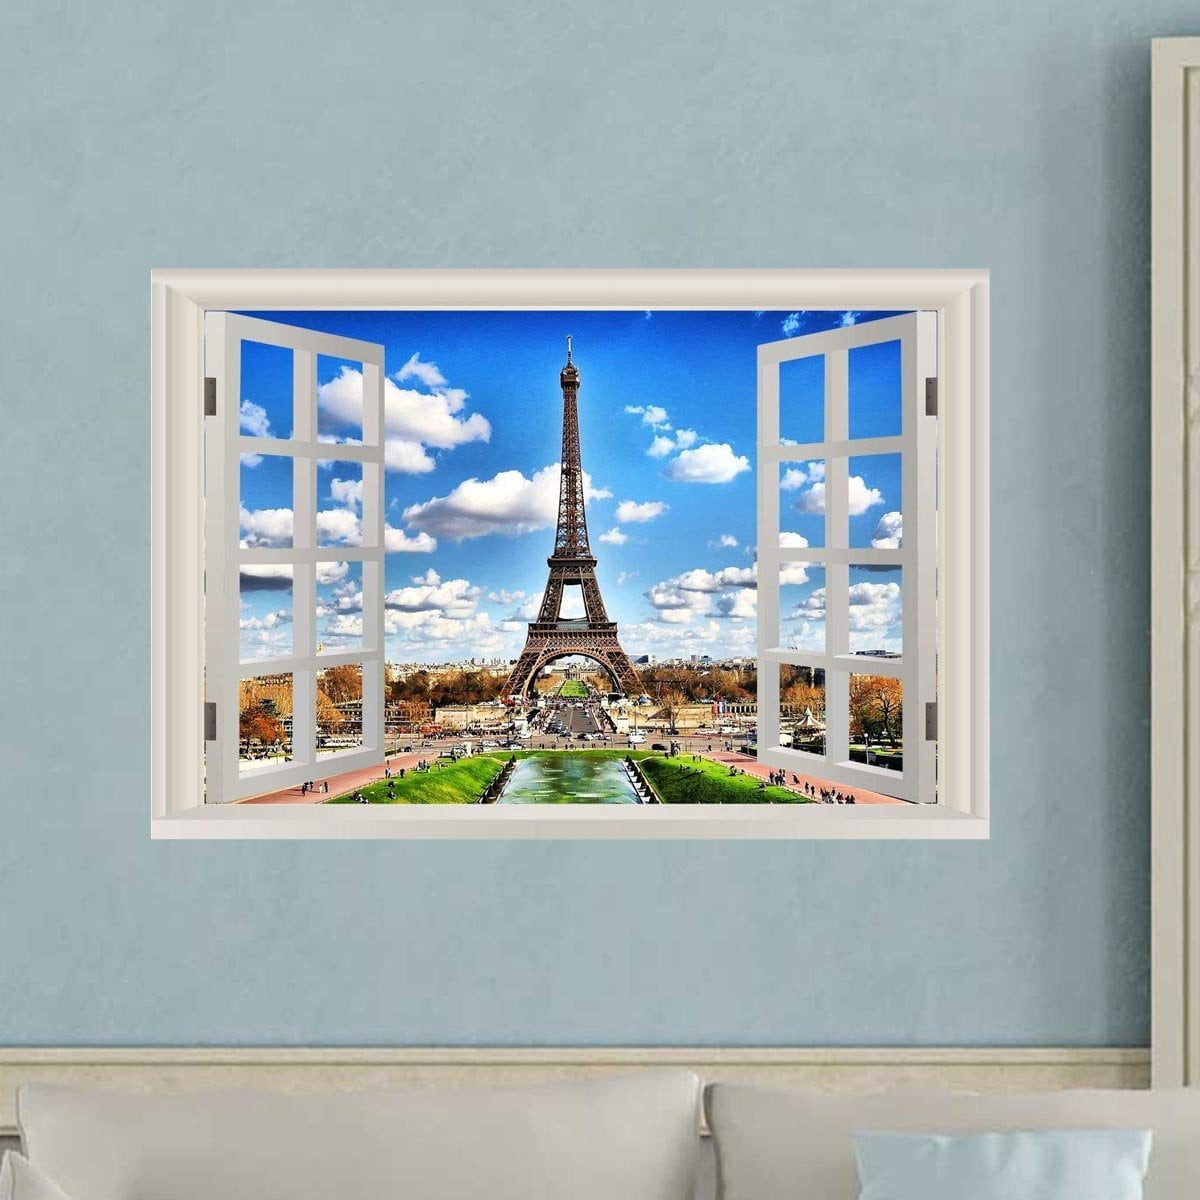 Details about   3D Printing Paris Eiffel Tower Themed Beach Towel Perfect for Beach Pool Large 